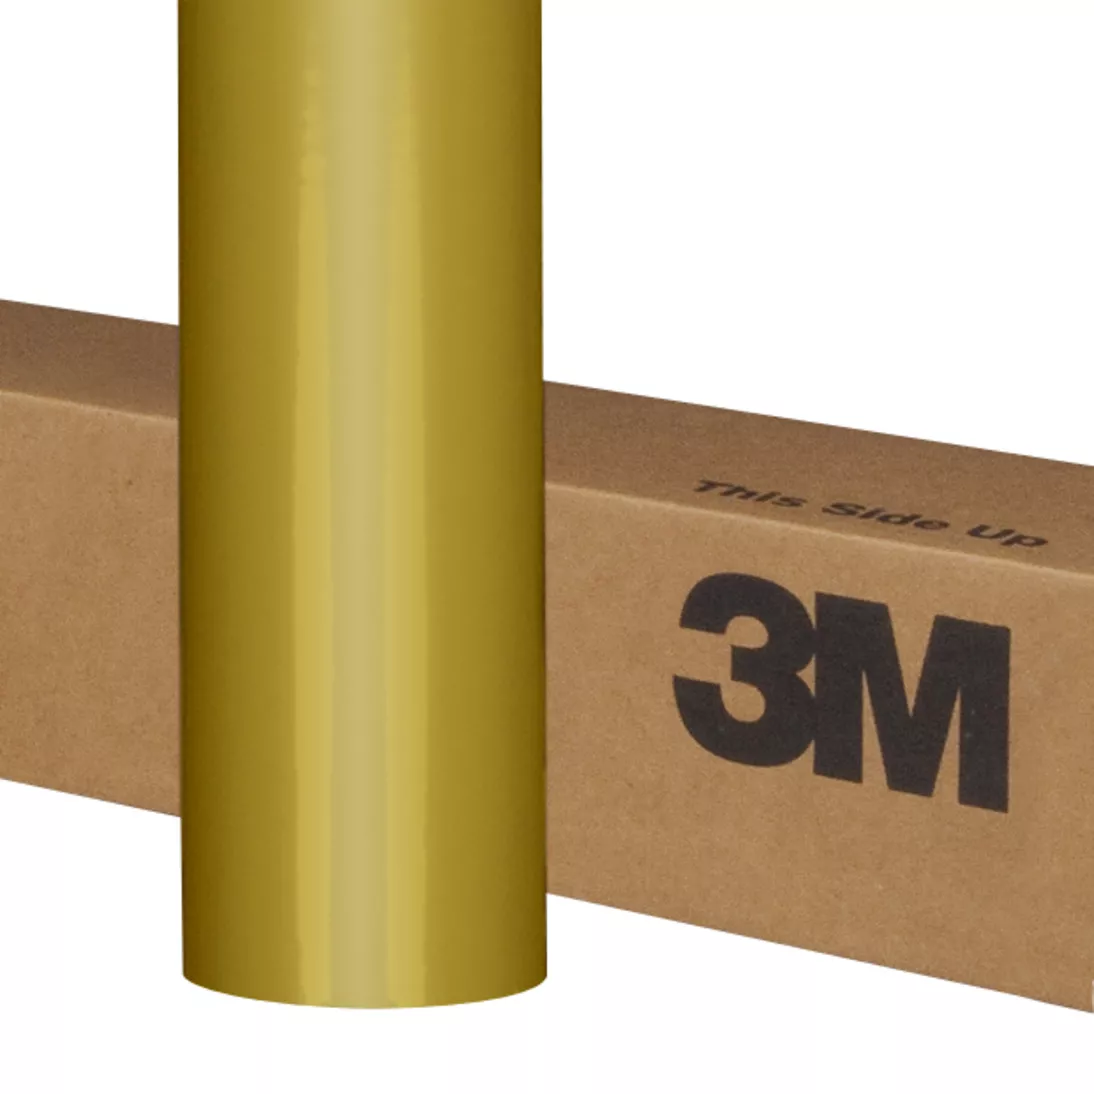 3M™ Scotchcal™ ElectroCut™ Graphic Film 7125-131, Satin Gold, 48 in x 50
yd